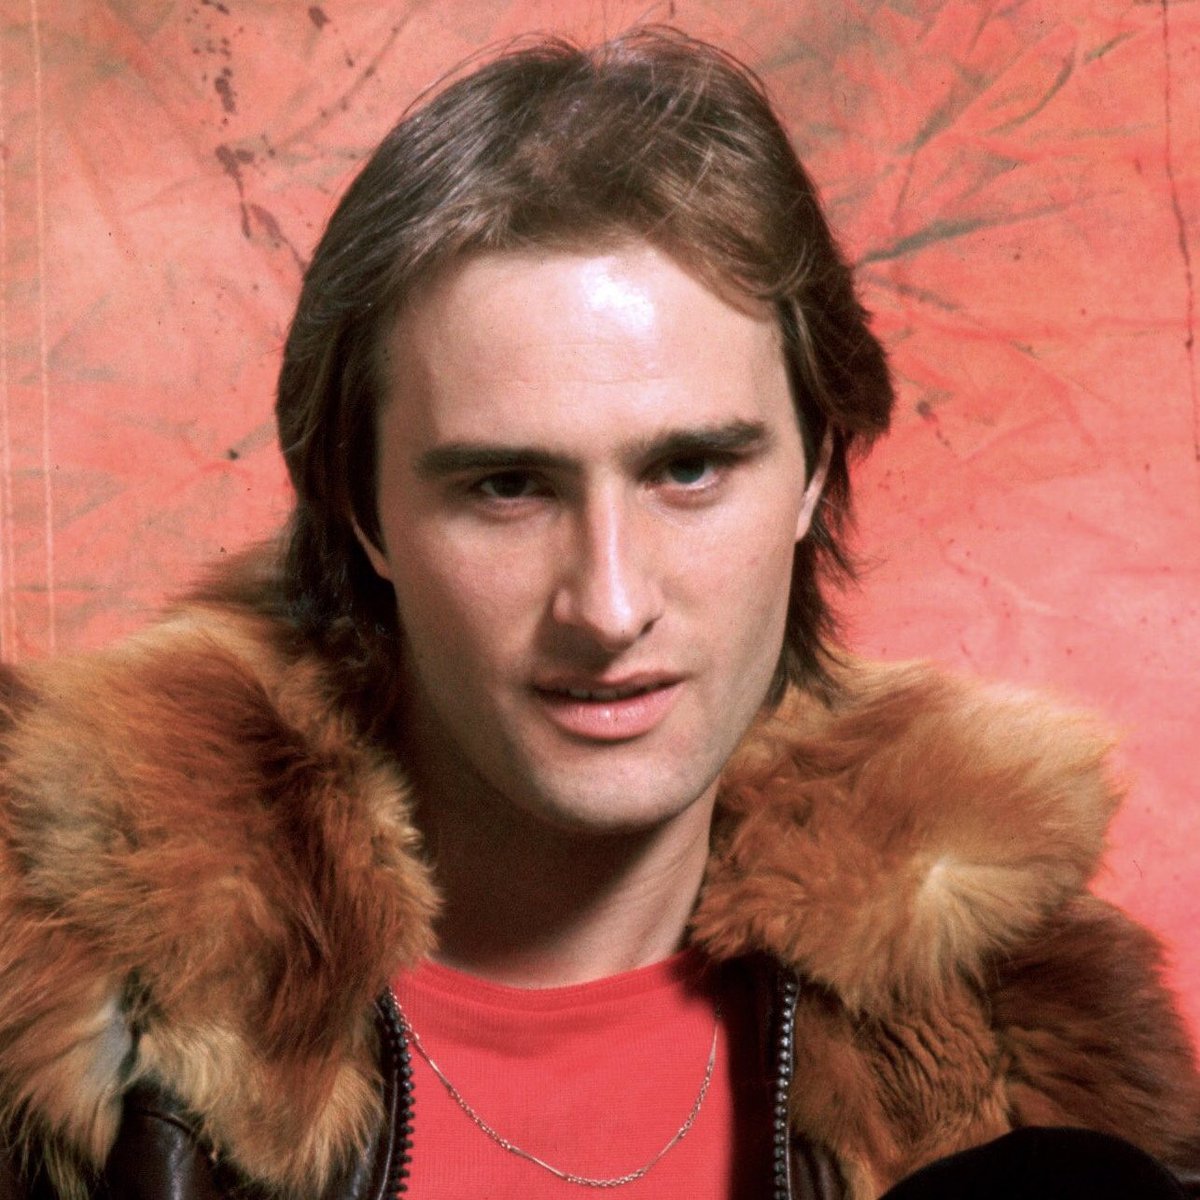 Steve Harley had a remarkable career that bestrode the musical landscape: from Bowie to Bush, from Wakeman to Brightman, from Batt to Bolan. And that’s just the collaborations. His own work was prolific and superb, and he wrote one of the greatest pop songs ever. Raising a glass.